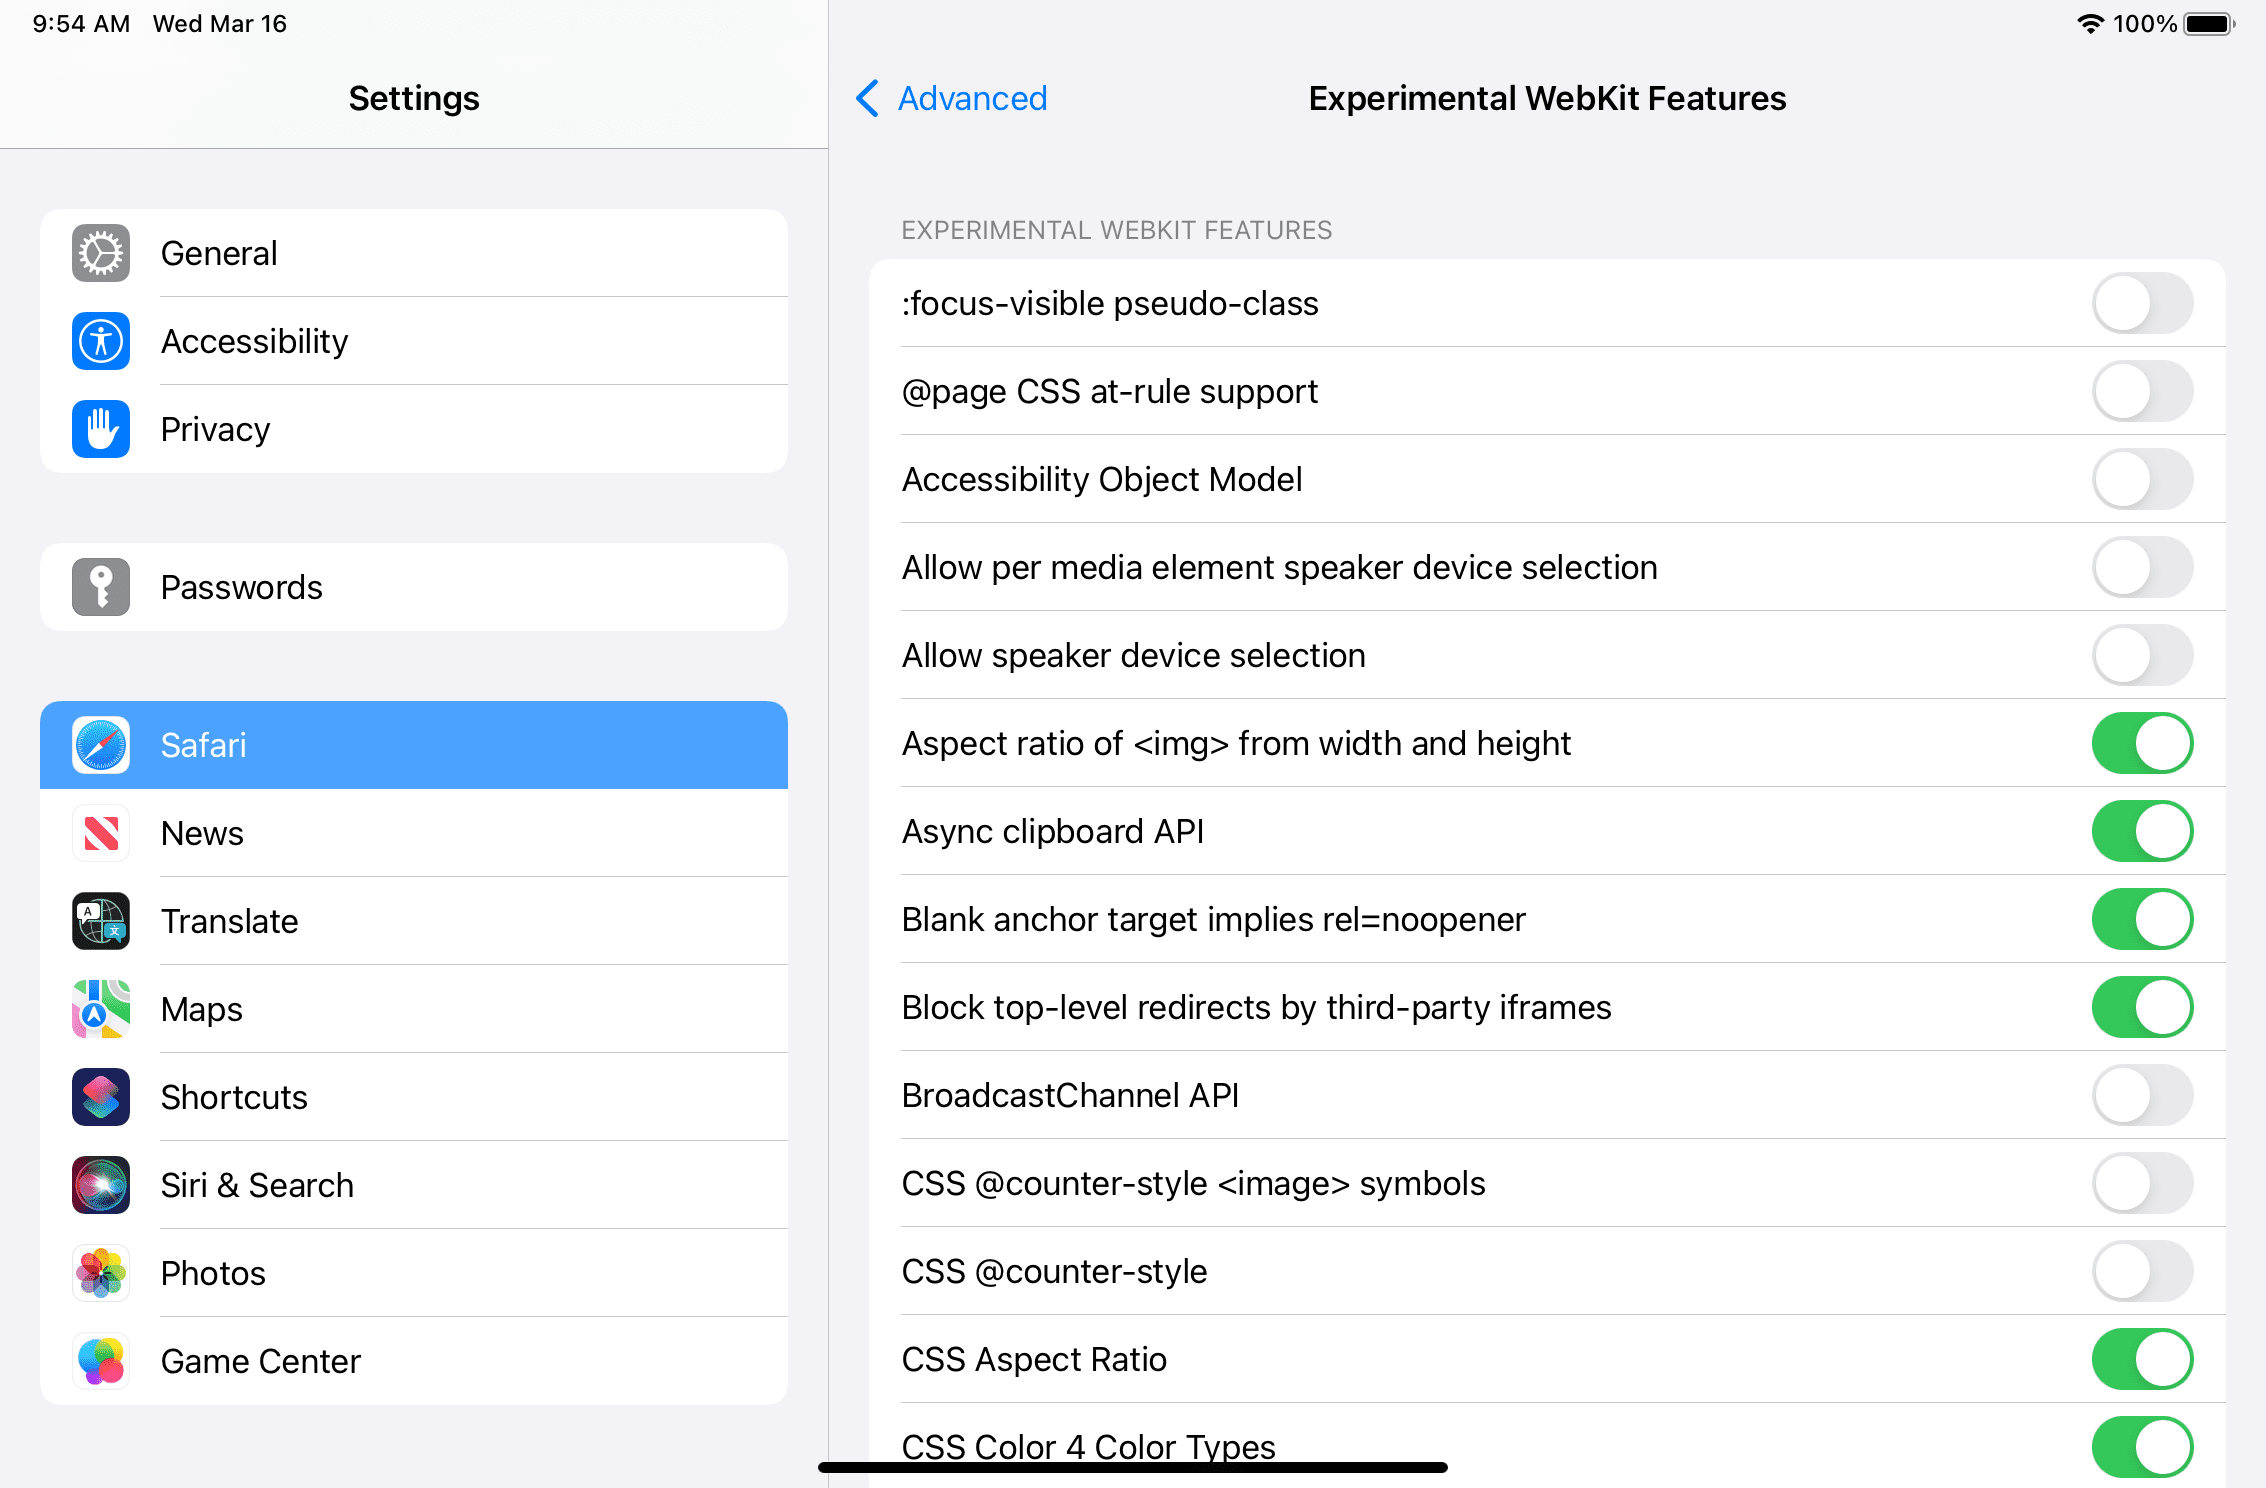 Experimental features available on Safari on iPadOS.